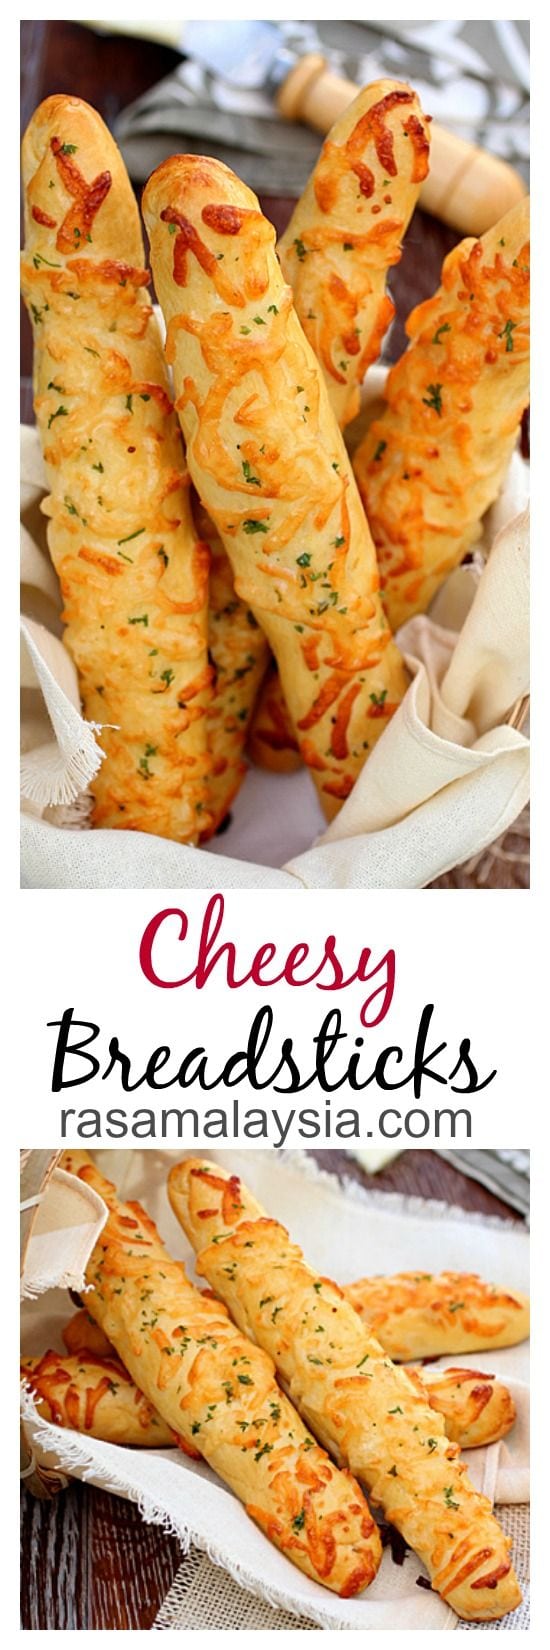 Cheese breadsticks recipe. Homemade cheese breadsticks are the best. Make these at home | rasamalaysia.com